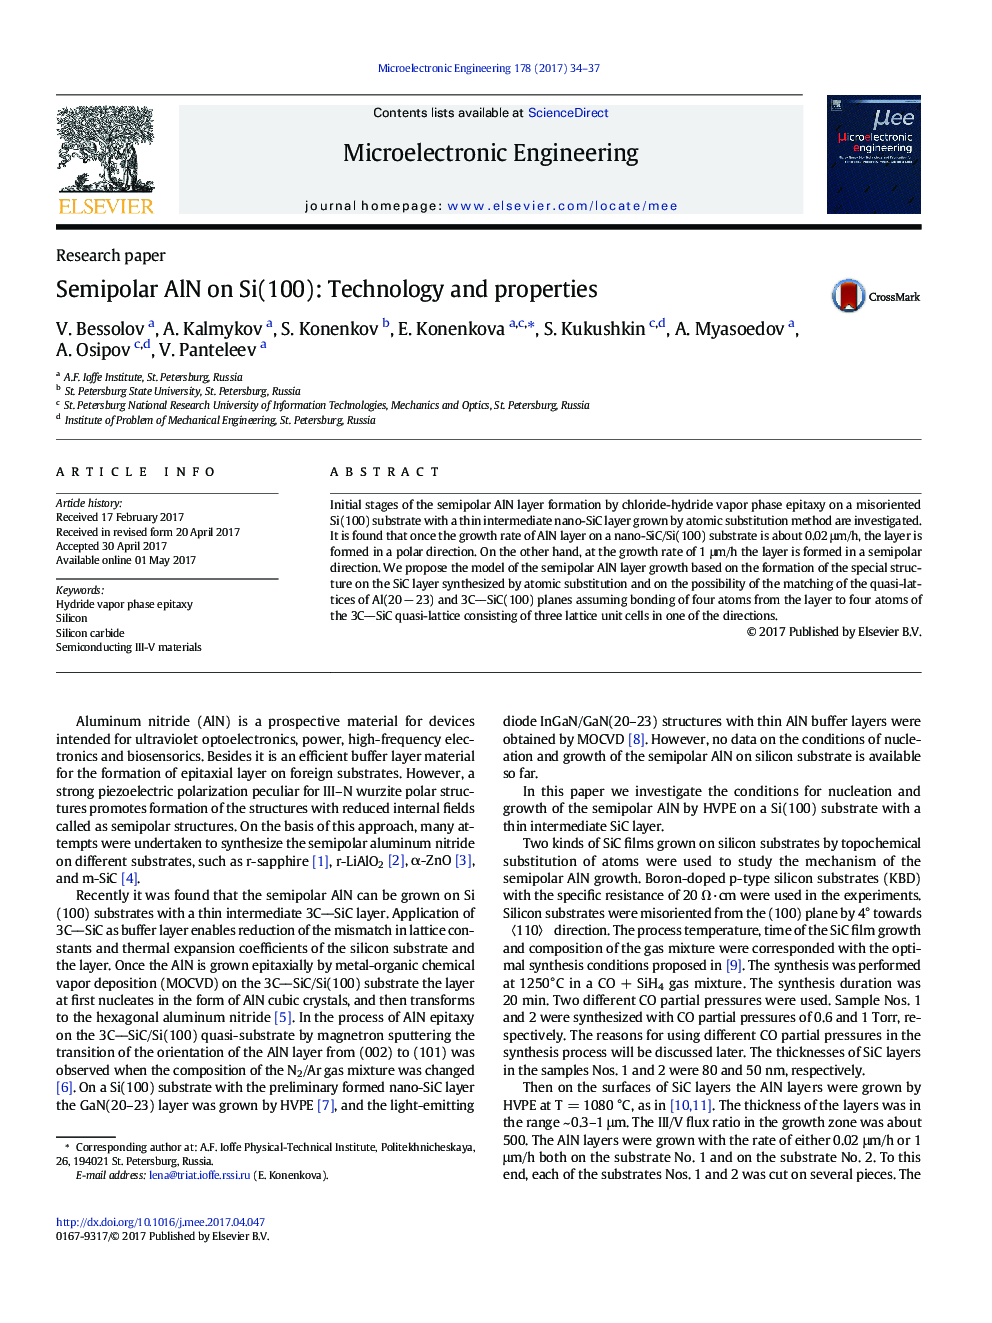 Semipolar AlN on Si(100): Technology and properties